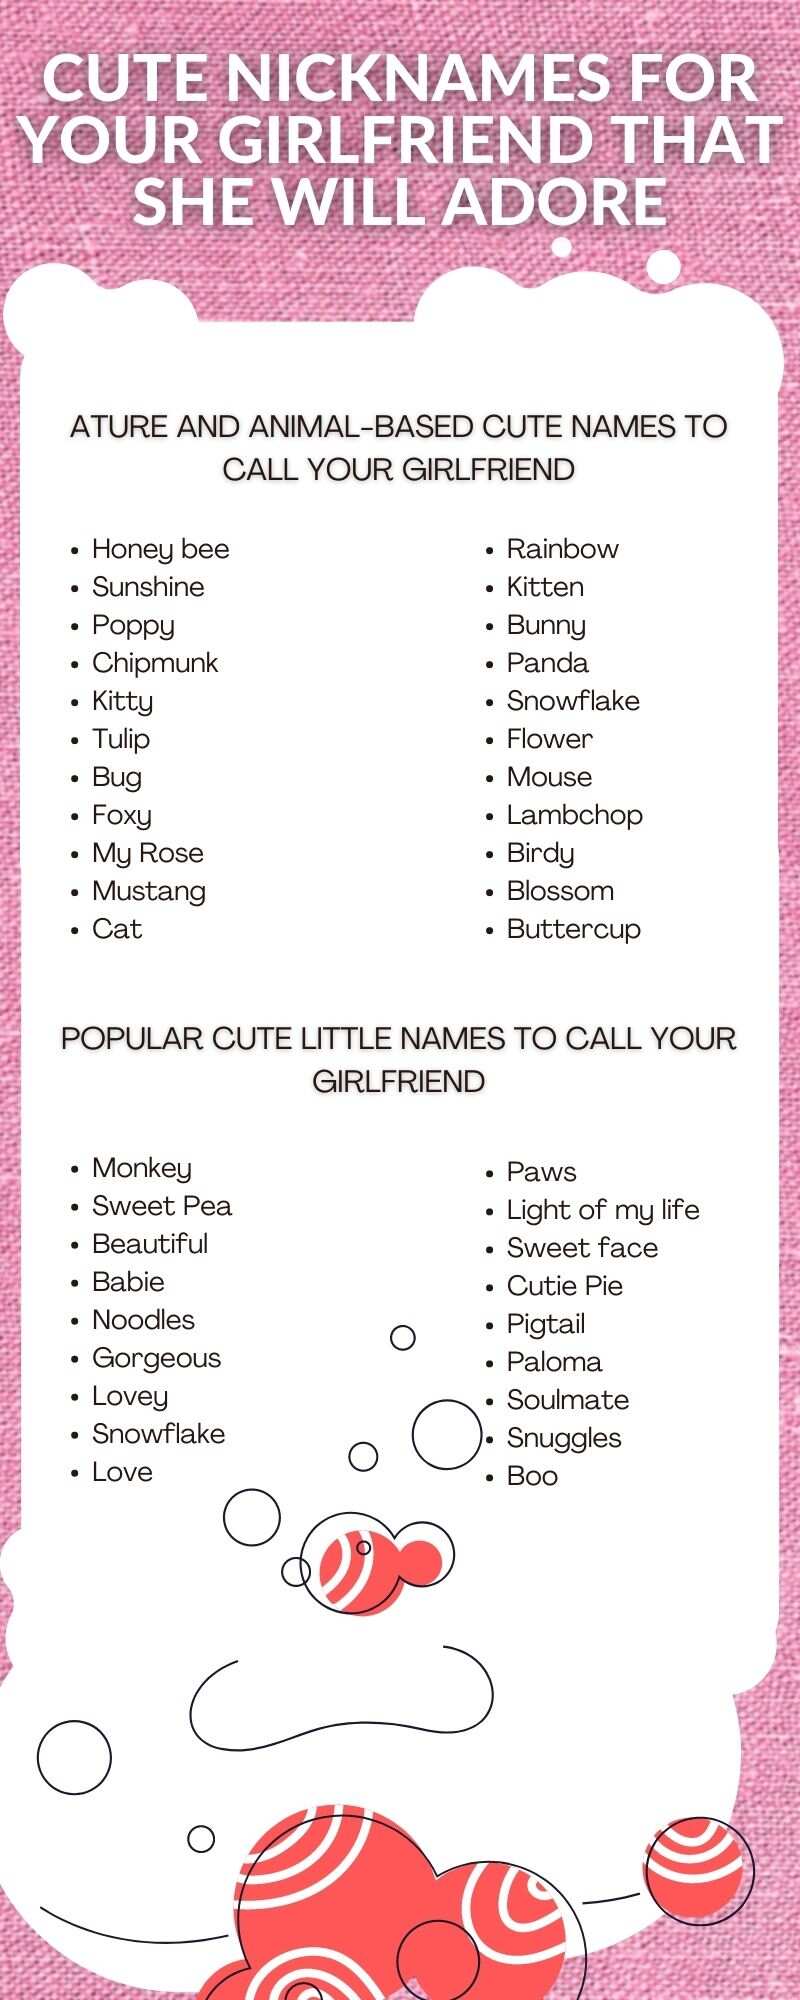 Cute nicknames for your girlfriend